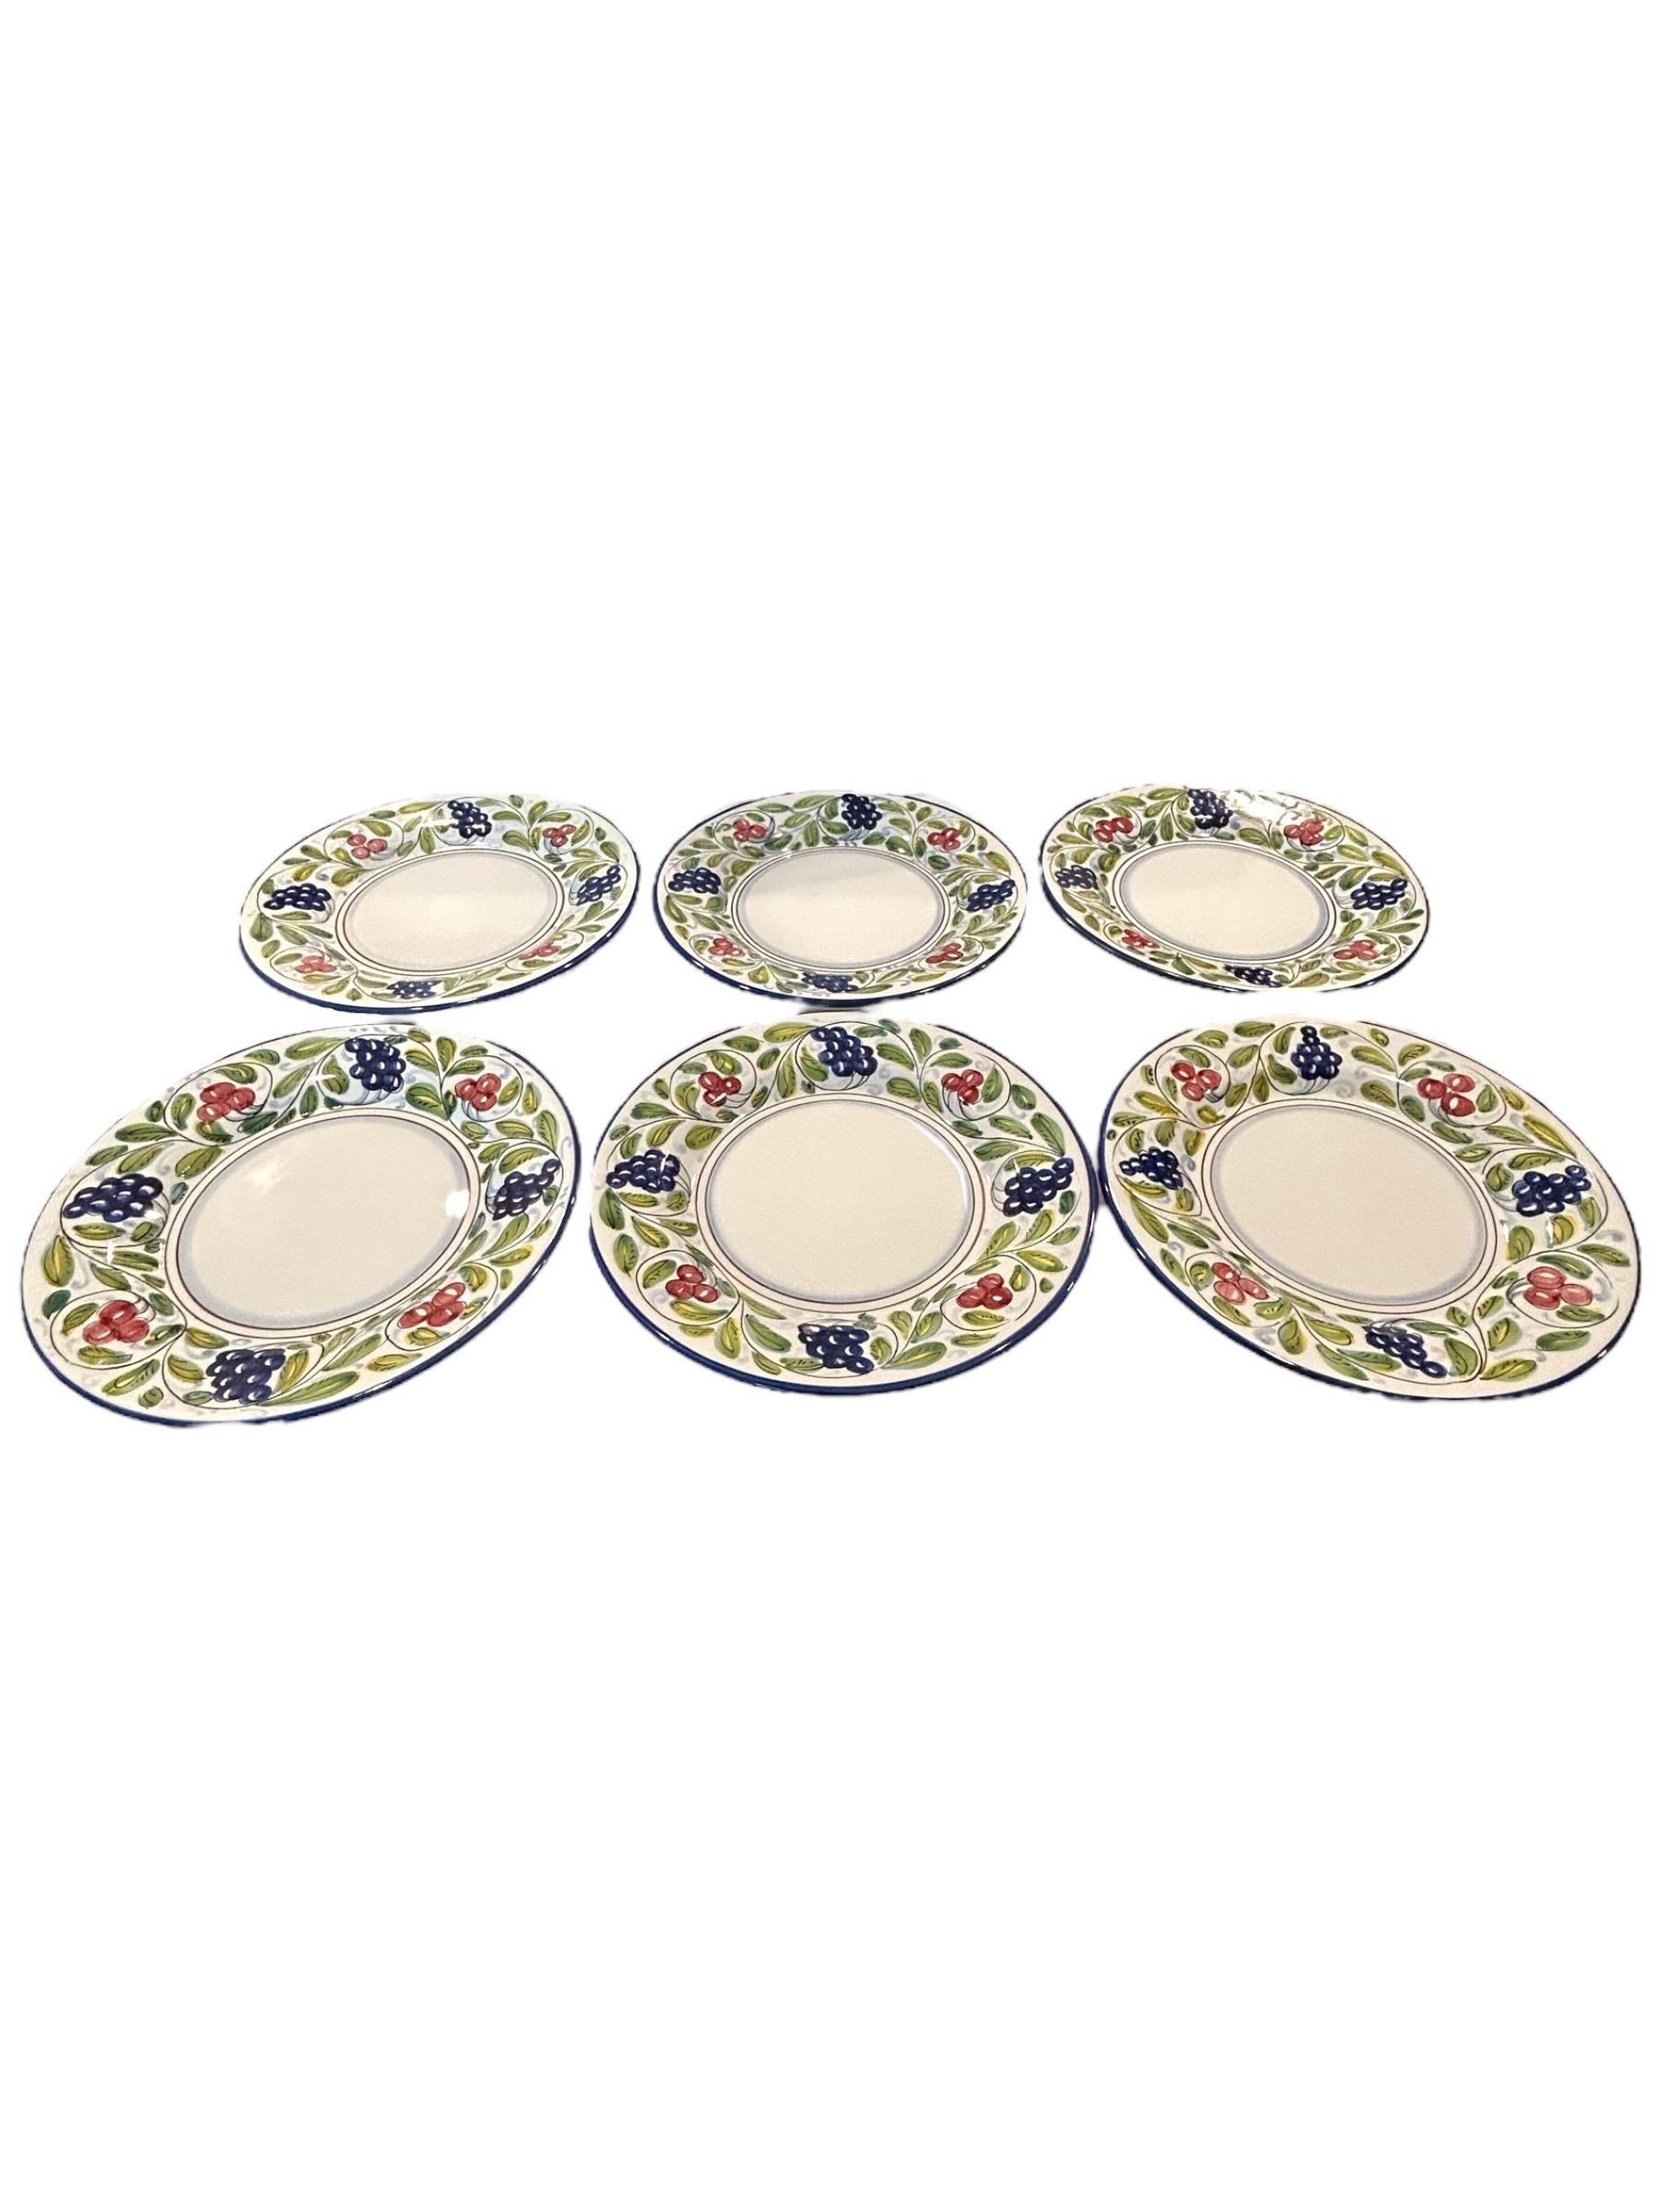 Excellent condition~no chips, cracks or crazing! This whimsical design of grapes and cherries with blue trim salad/dessert plates will make a wonderful addition to any table decor!

8.75”dia.